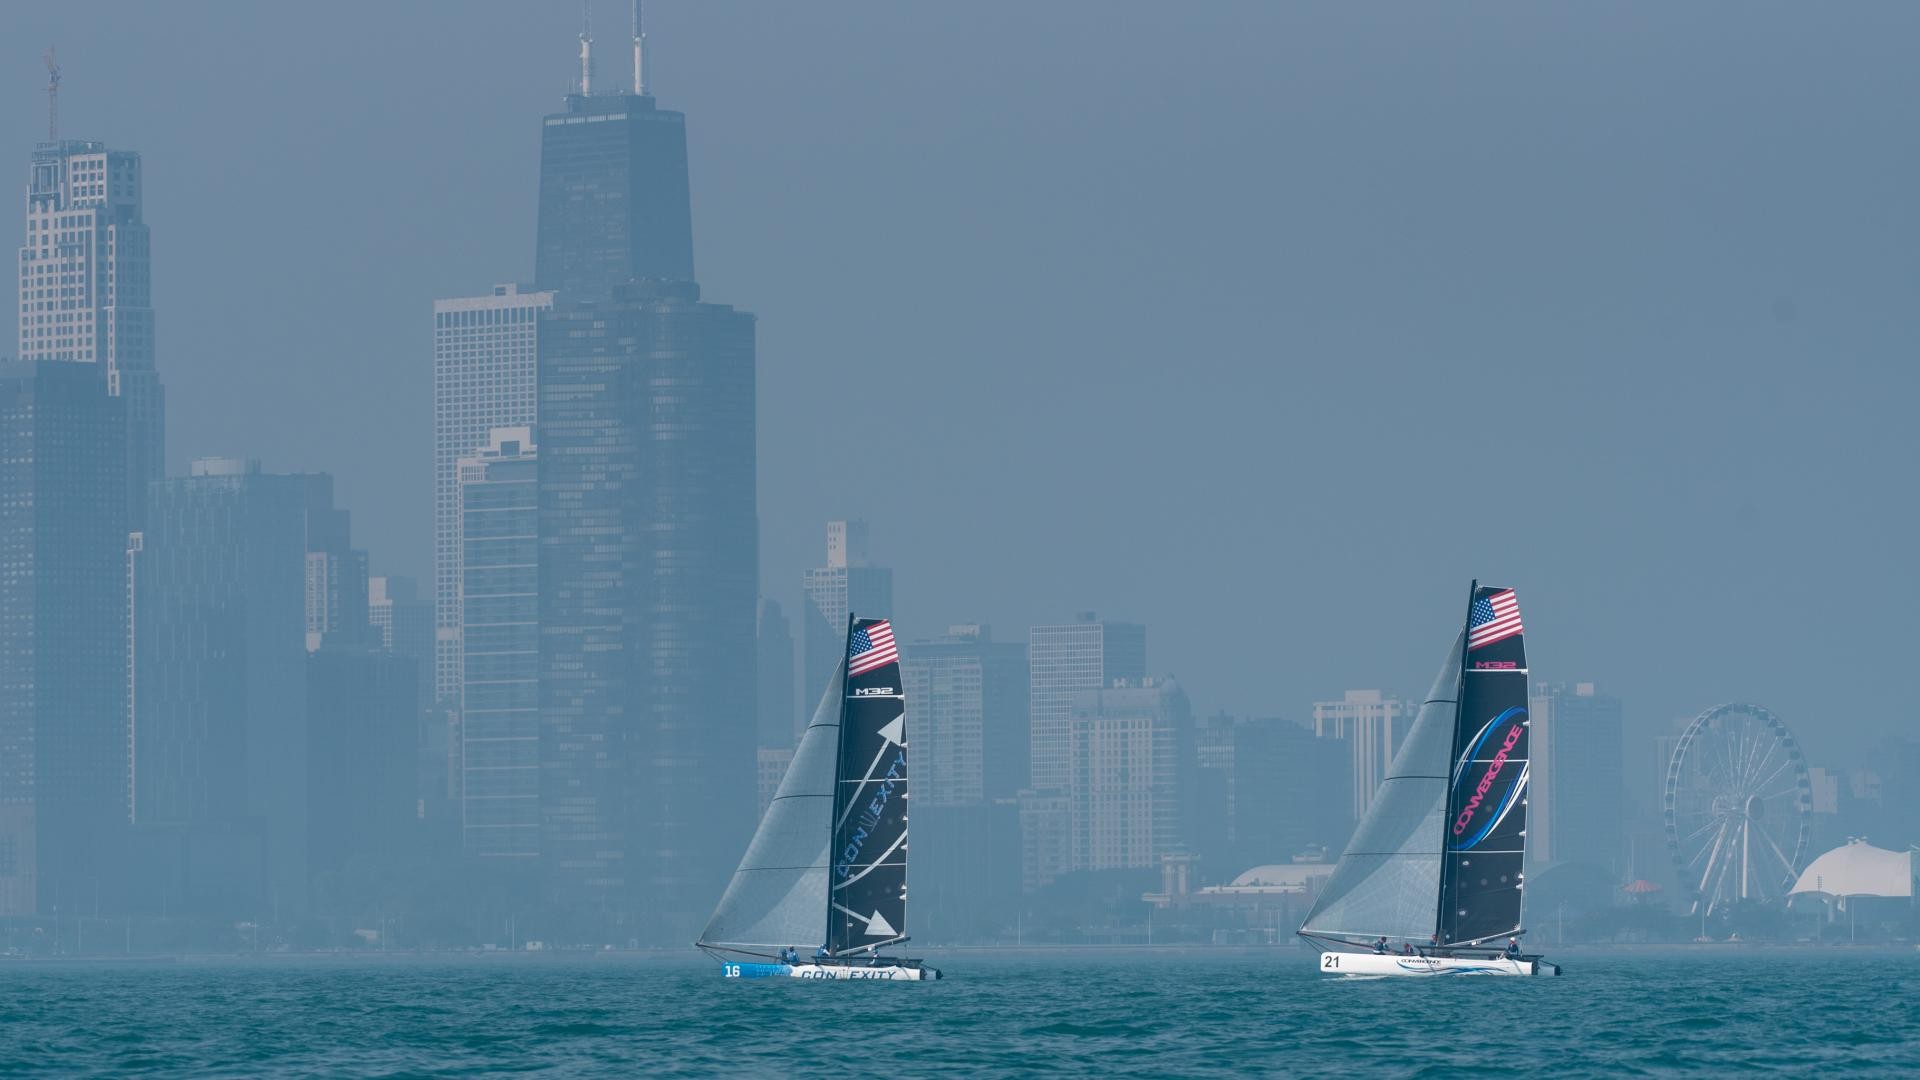 Chicago Talent Springboards Ahead at M32 World Championship